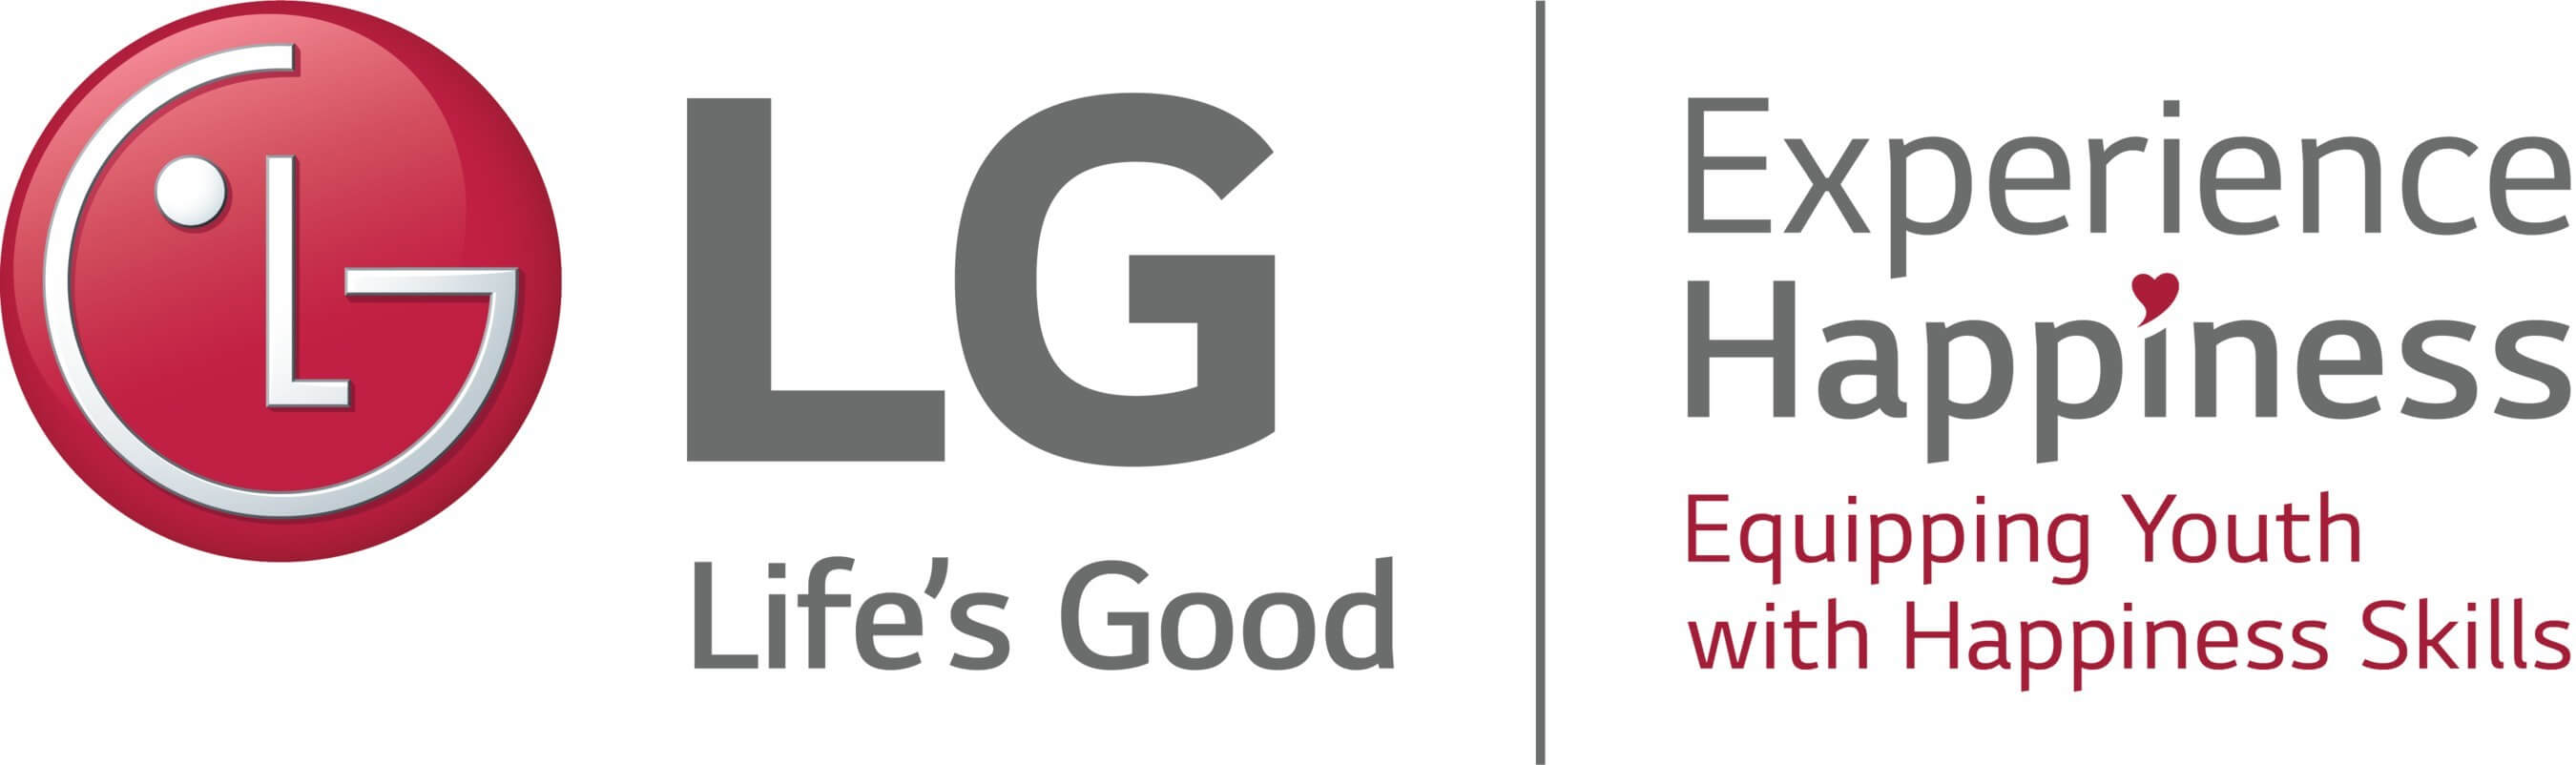 Lg experince Happiness logo